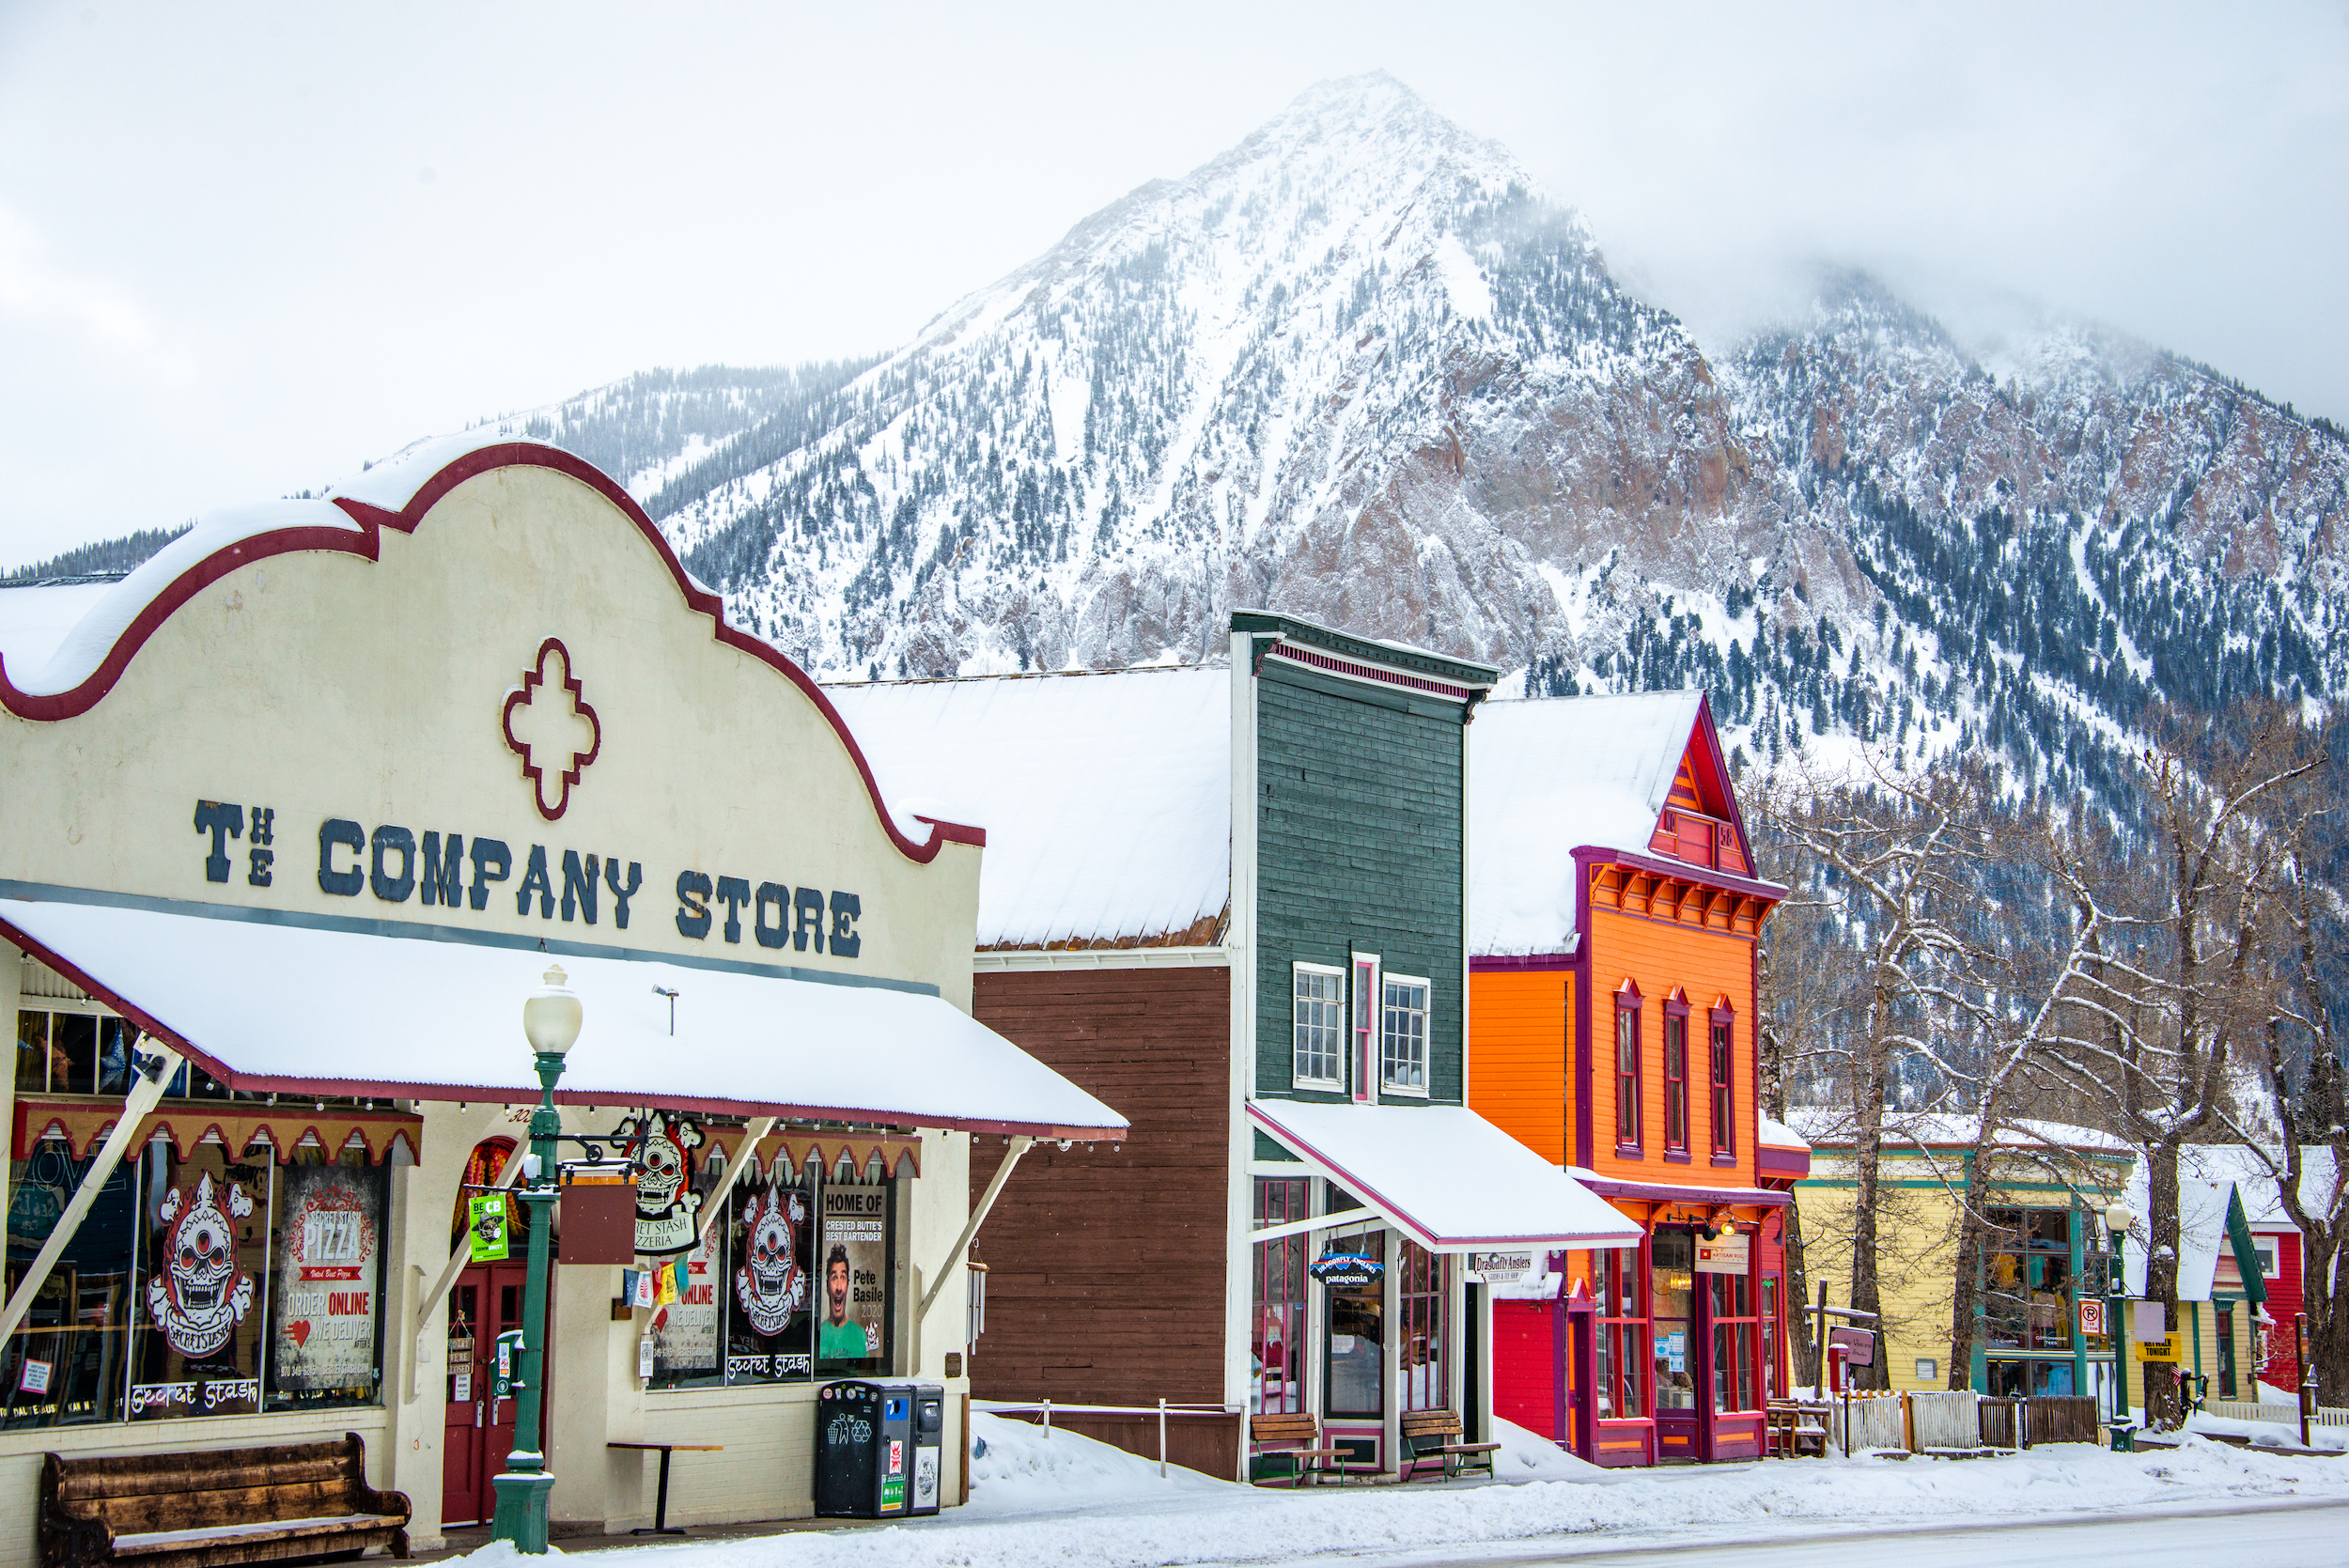 A downtown street covered in snow with a snowcapped mountain peak in the background. This is Elk Avenue in winter in Crested Butte